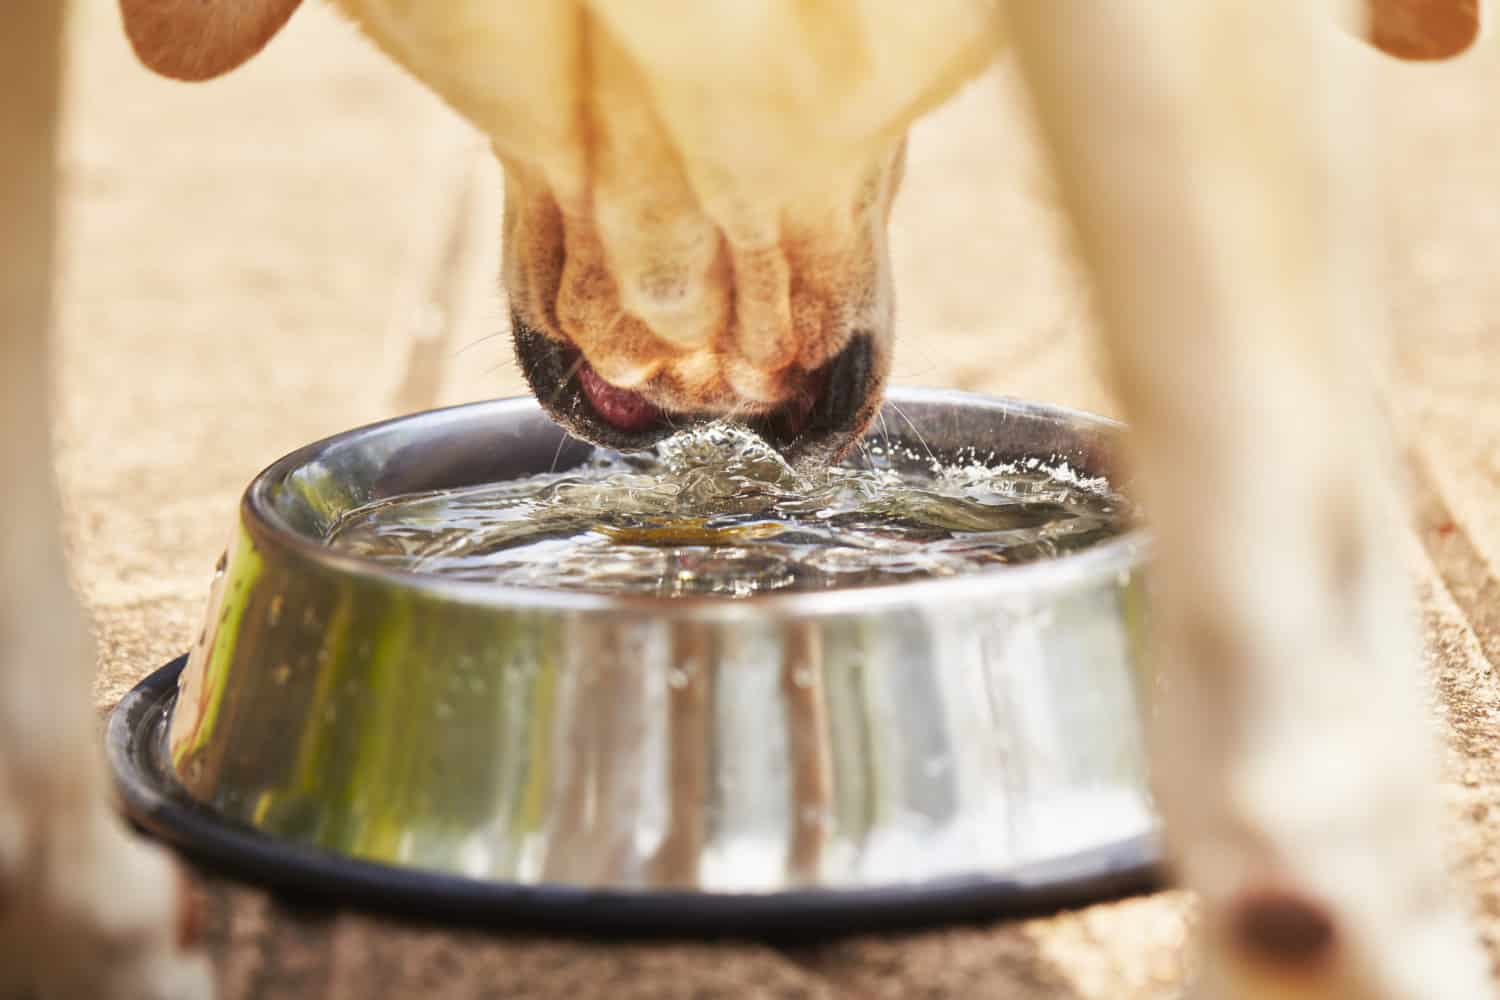 A dog drinks from a water bowl